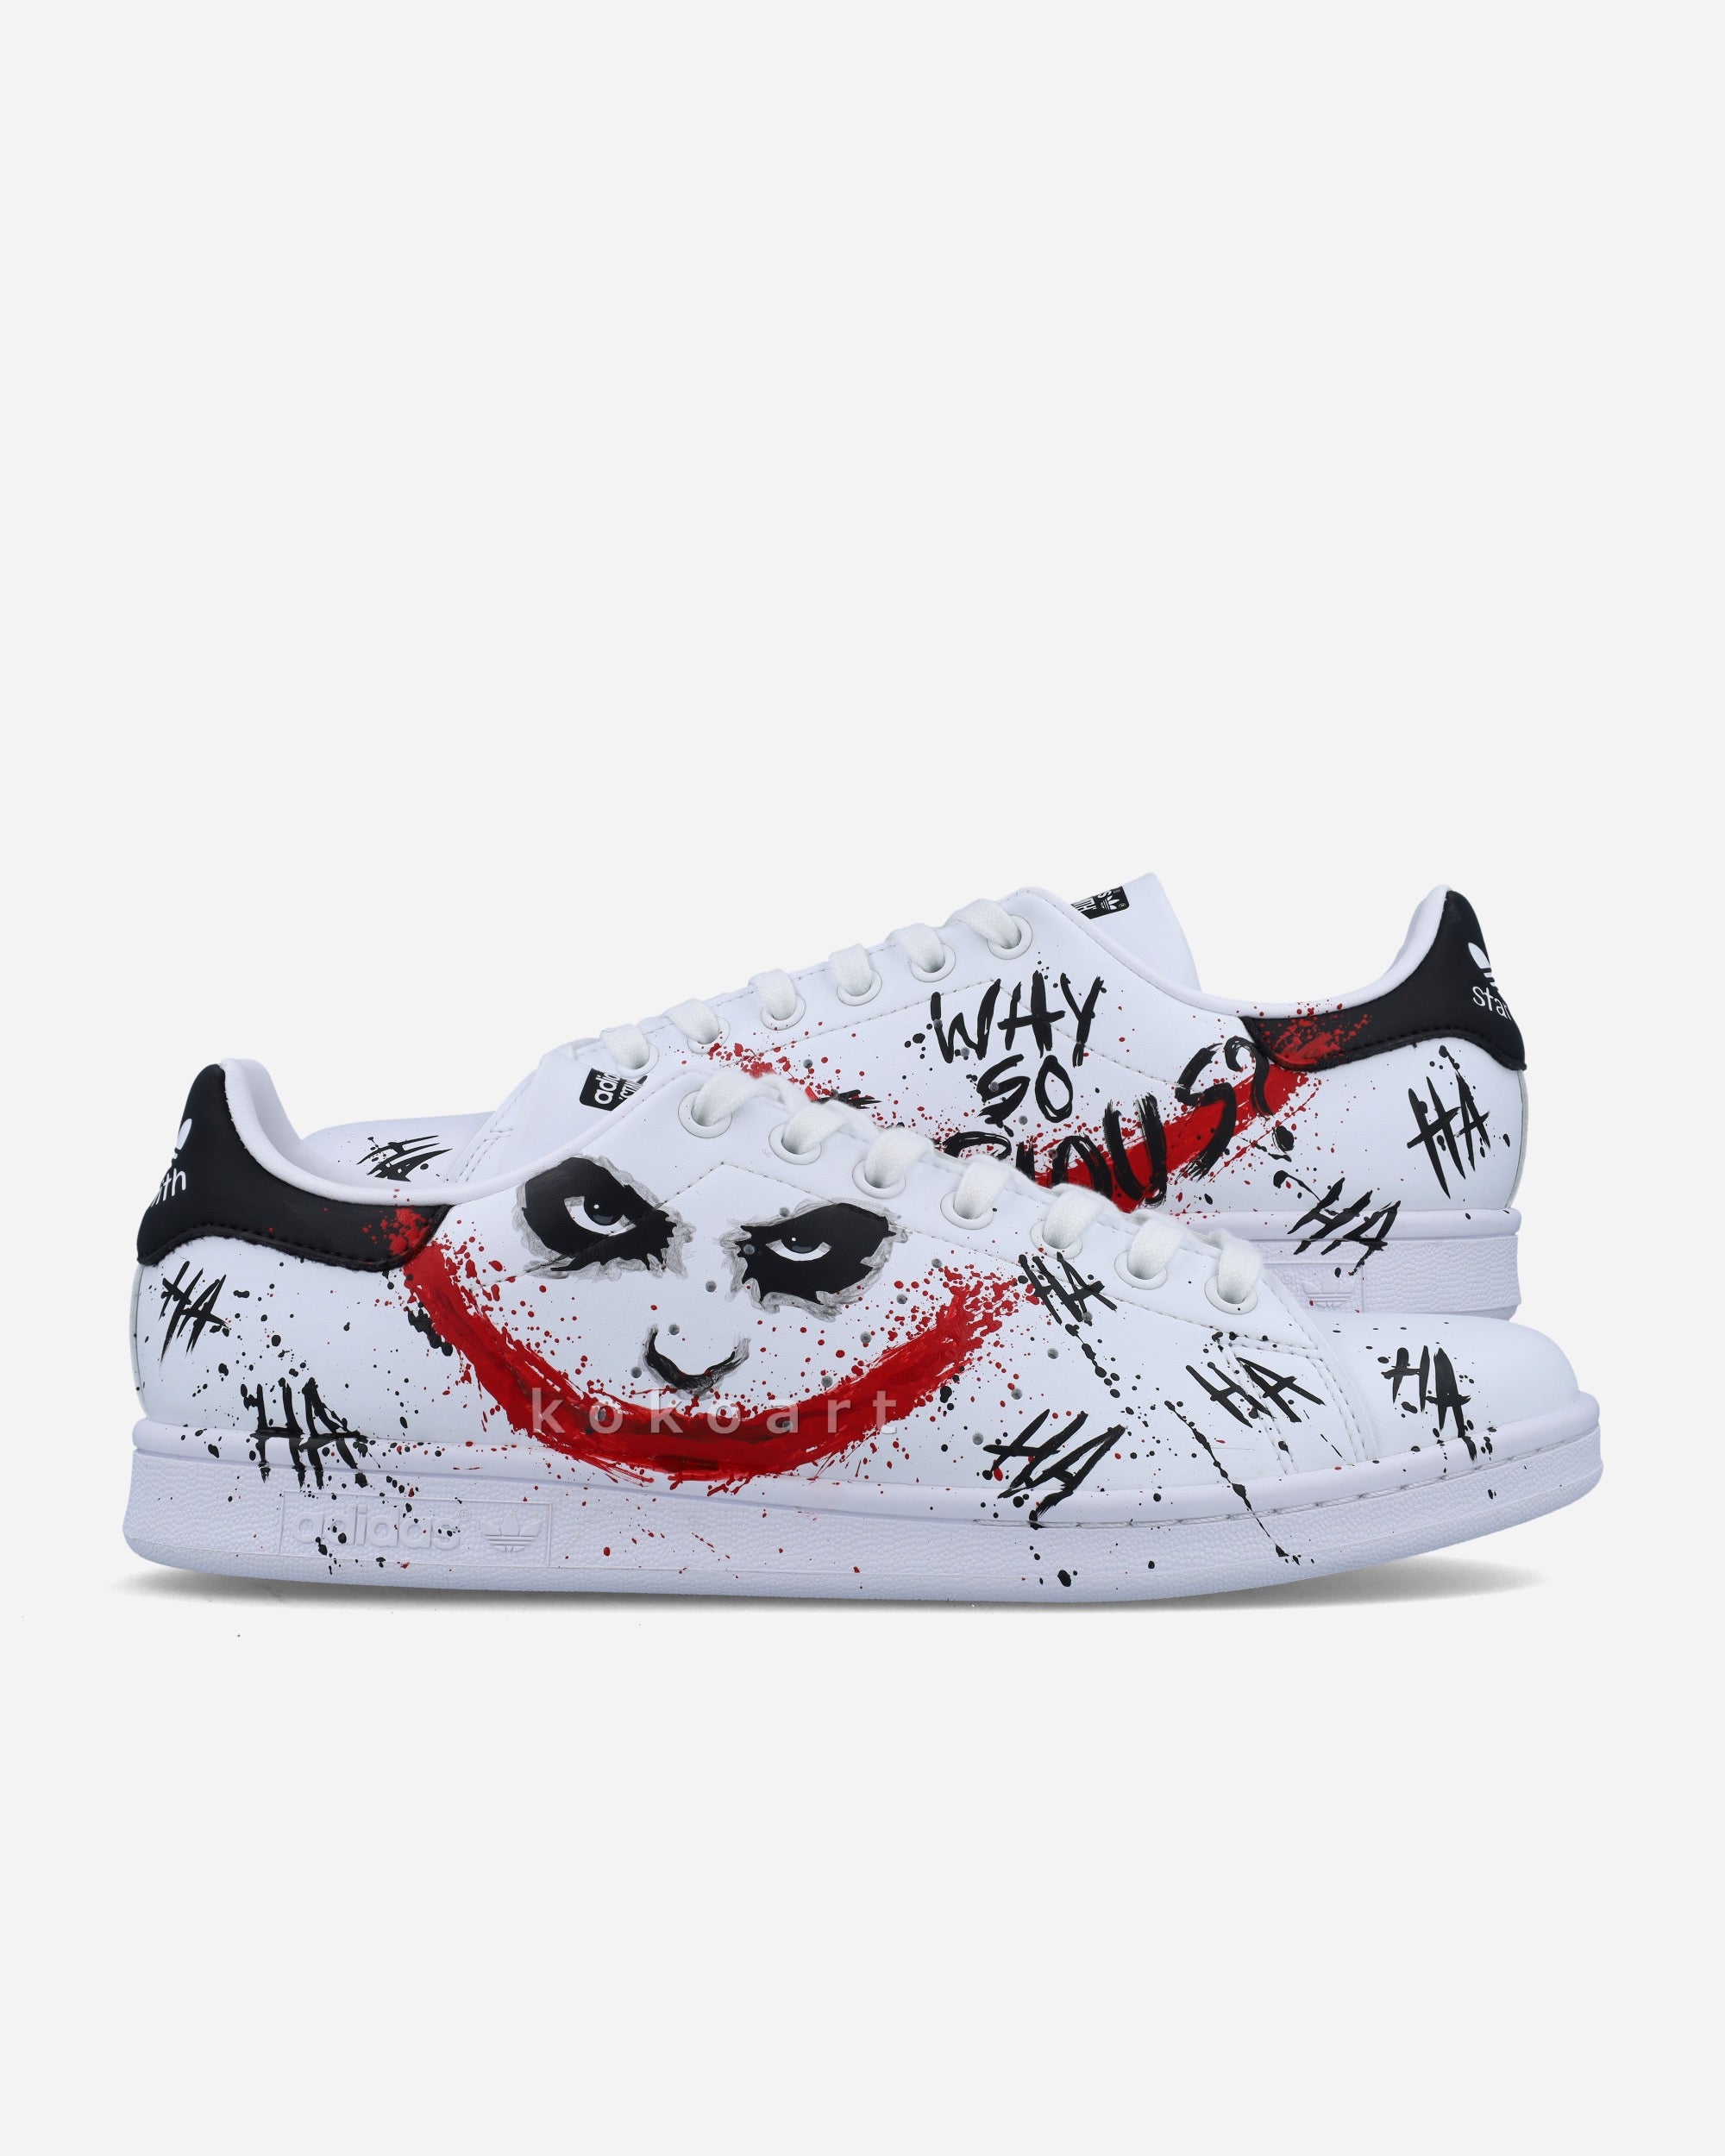 Adidas Hand Painted Why so Serious?